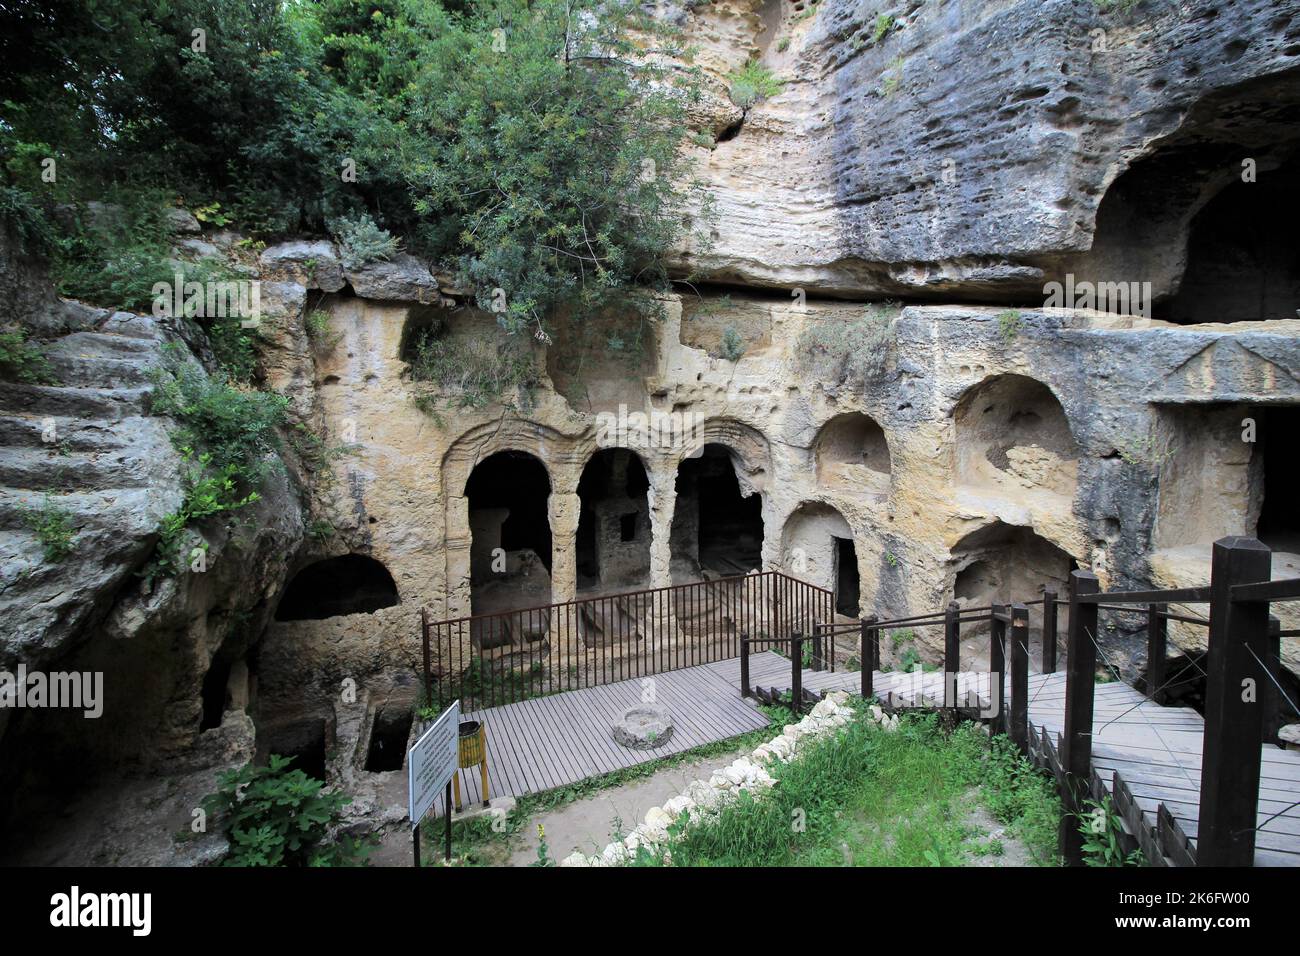 Besikli Cave is located in the Samandag district of Hatay. Cave BC. It was made in the 1st century. Titus Tunnel is also located near the cave. Stock Photo